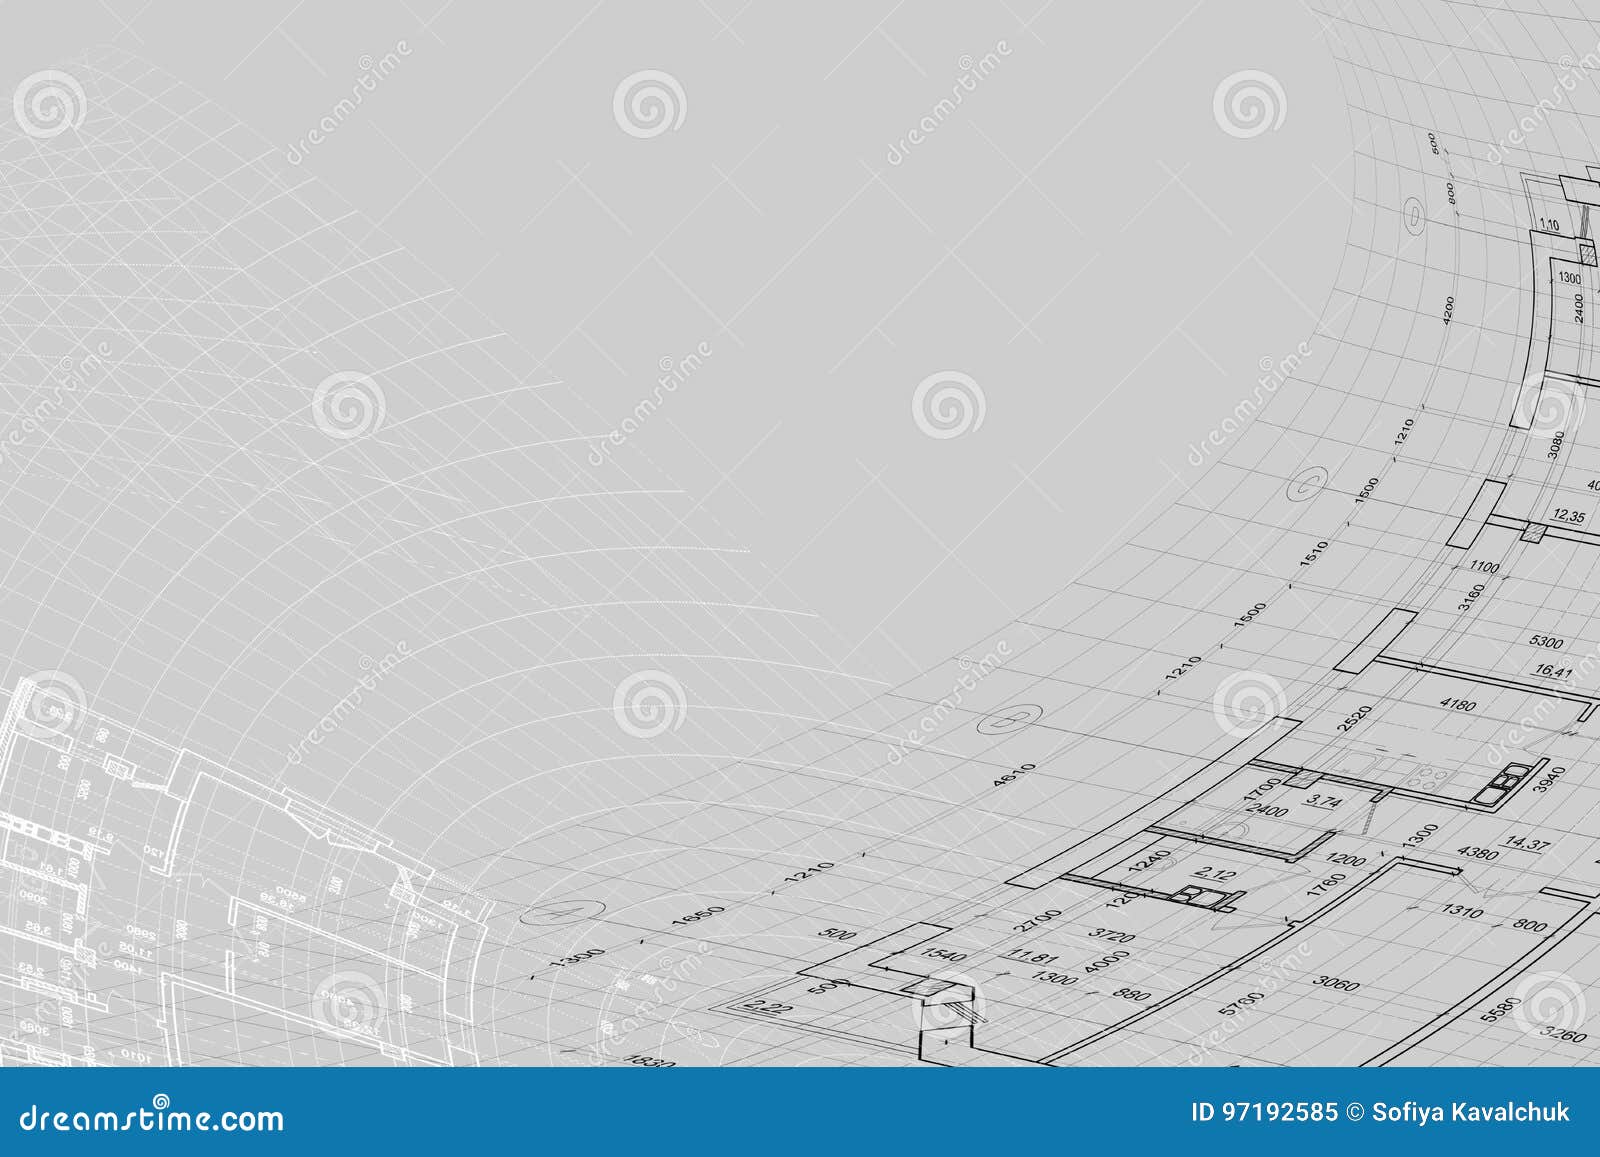 Background of Architectural Drawing Stock Illustration - Illustration of  renovation, architecture: 97192585